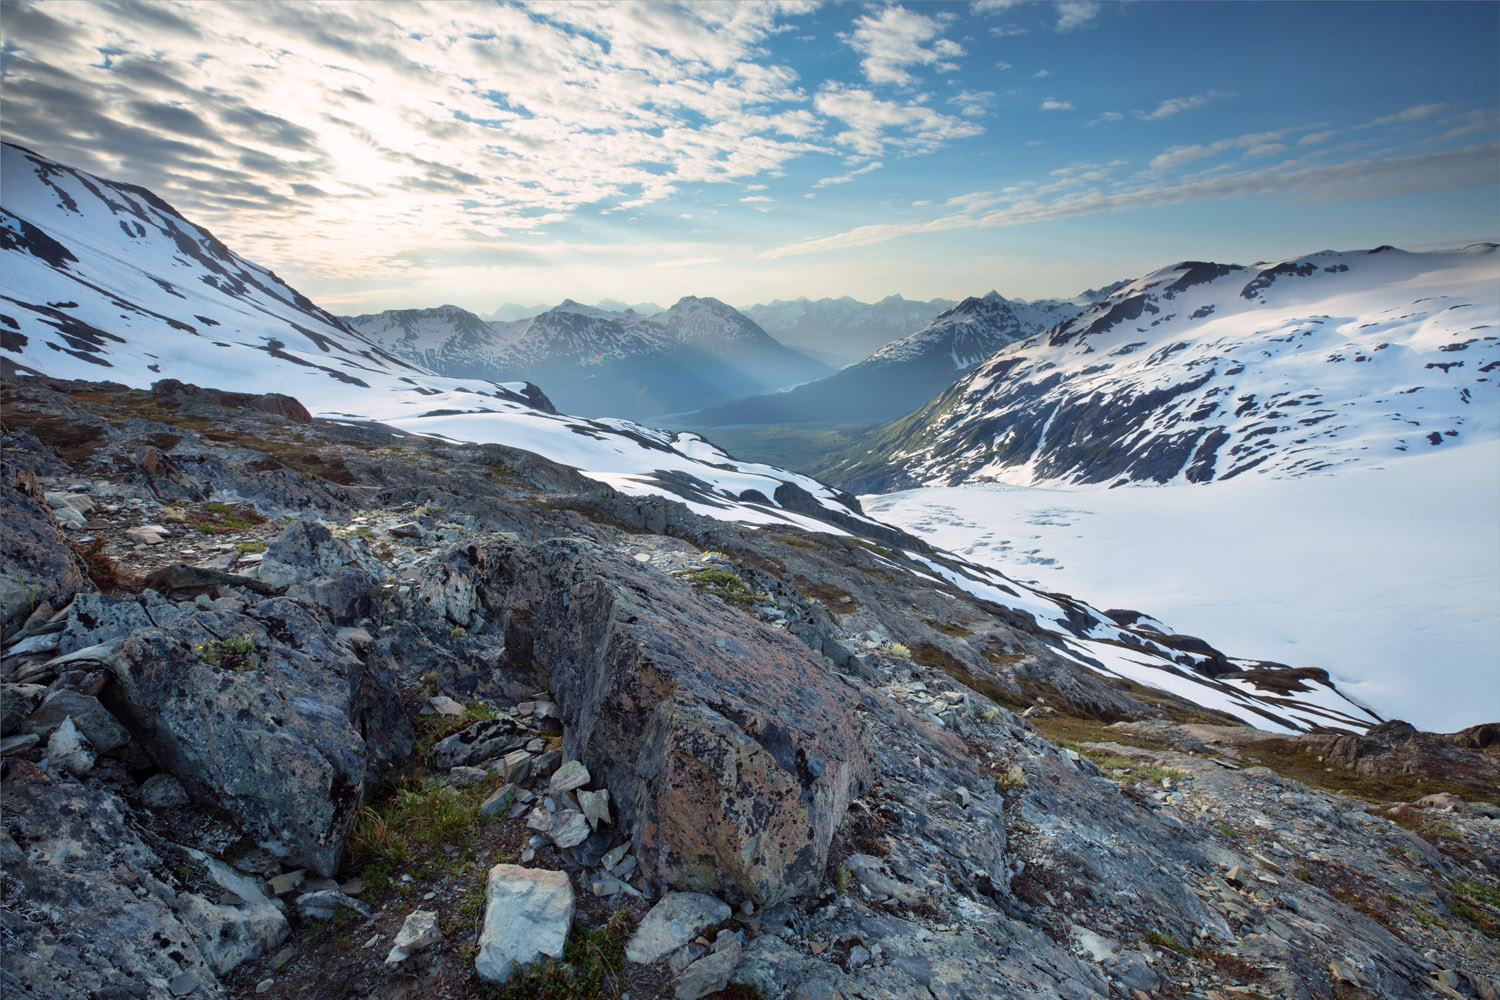 View from an overlook of the Harding Icefield at sunrise.